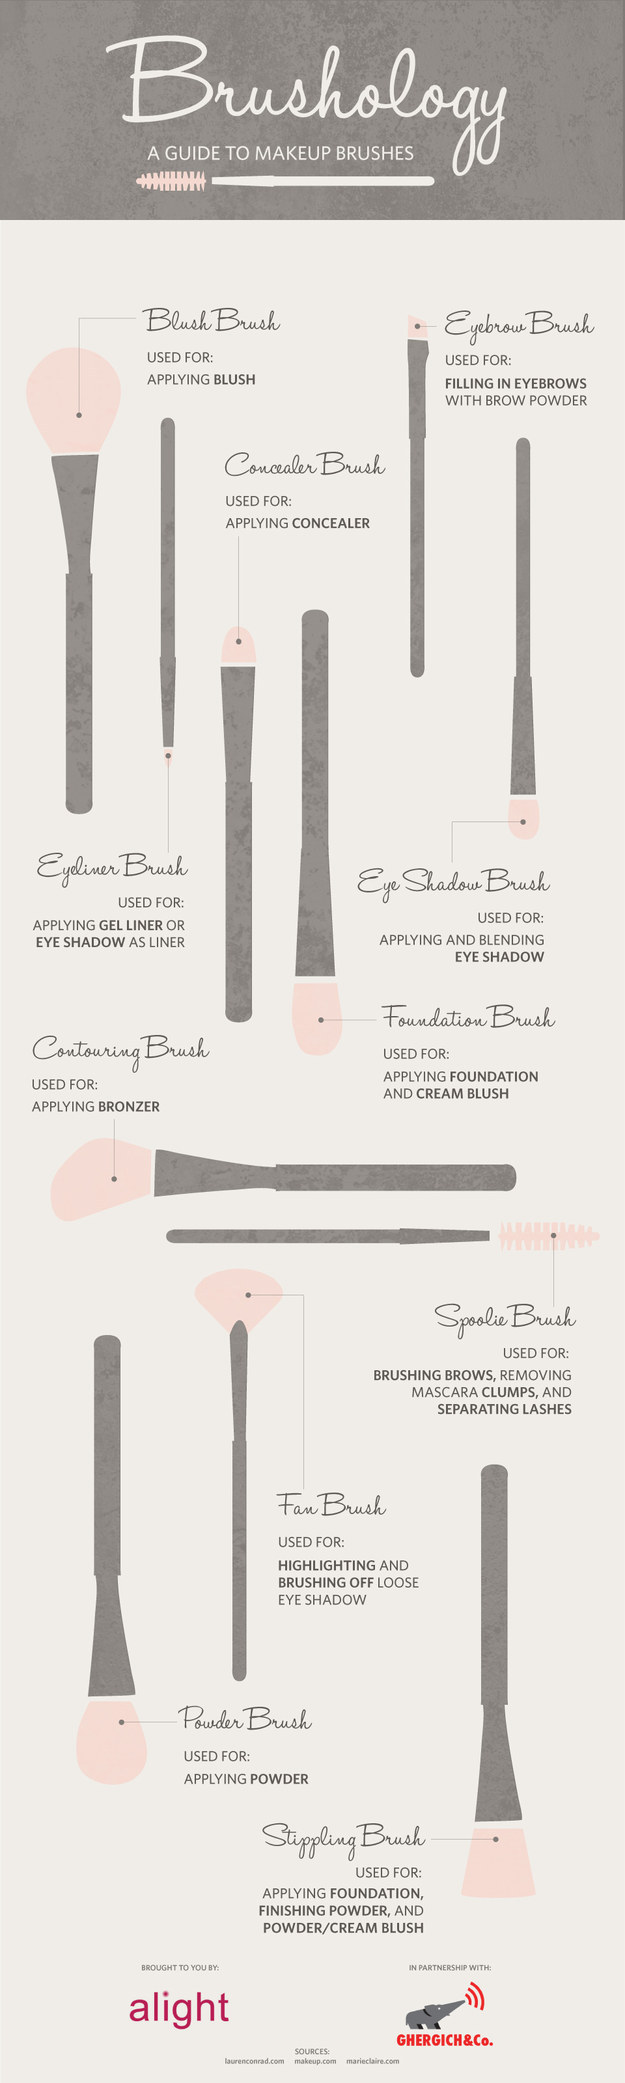 A Guide to Makeup Brushes